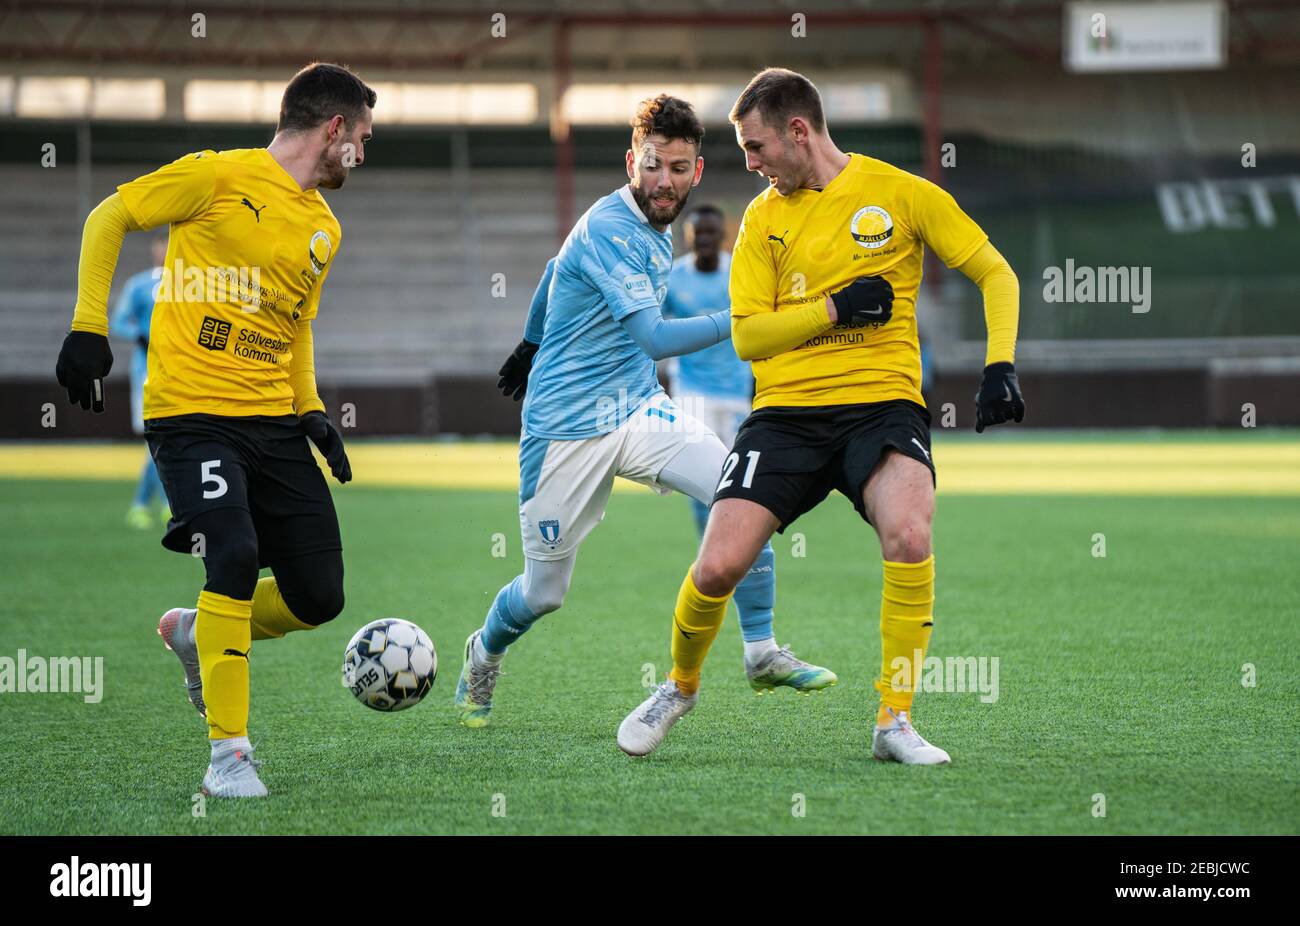 Malmoe, Sweden. 12th Feb, 2021. Erdal Rakip (19) of Malmoe FF seen in between Kadir Hodzic (5) and Adam Petersson (21) of Mjallby during a test match between Malmoe FF and Mjallby AIF at Malmoe Idrottsplats in Malmoe. (Photo Credit: Gonzales Photo/Alamy Live News Stock Photo